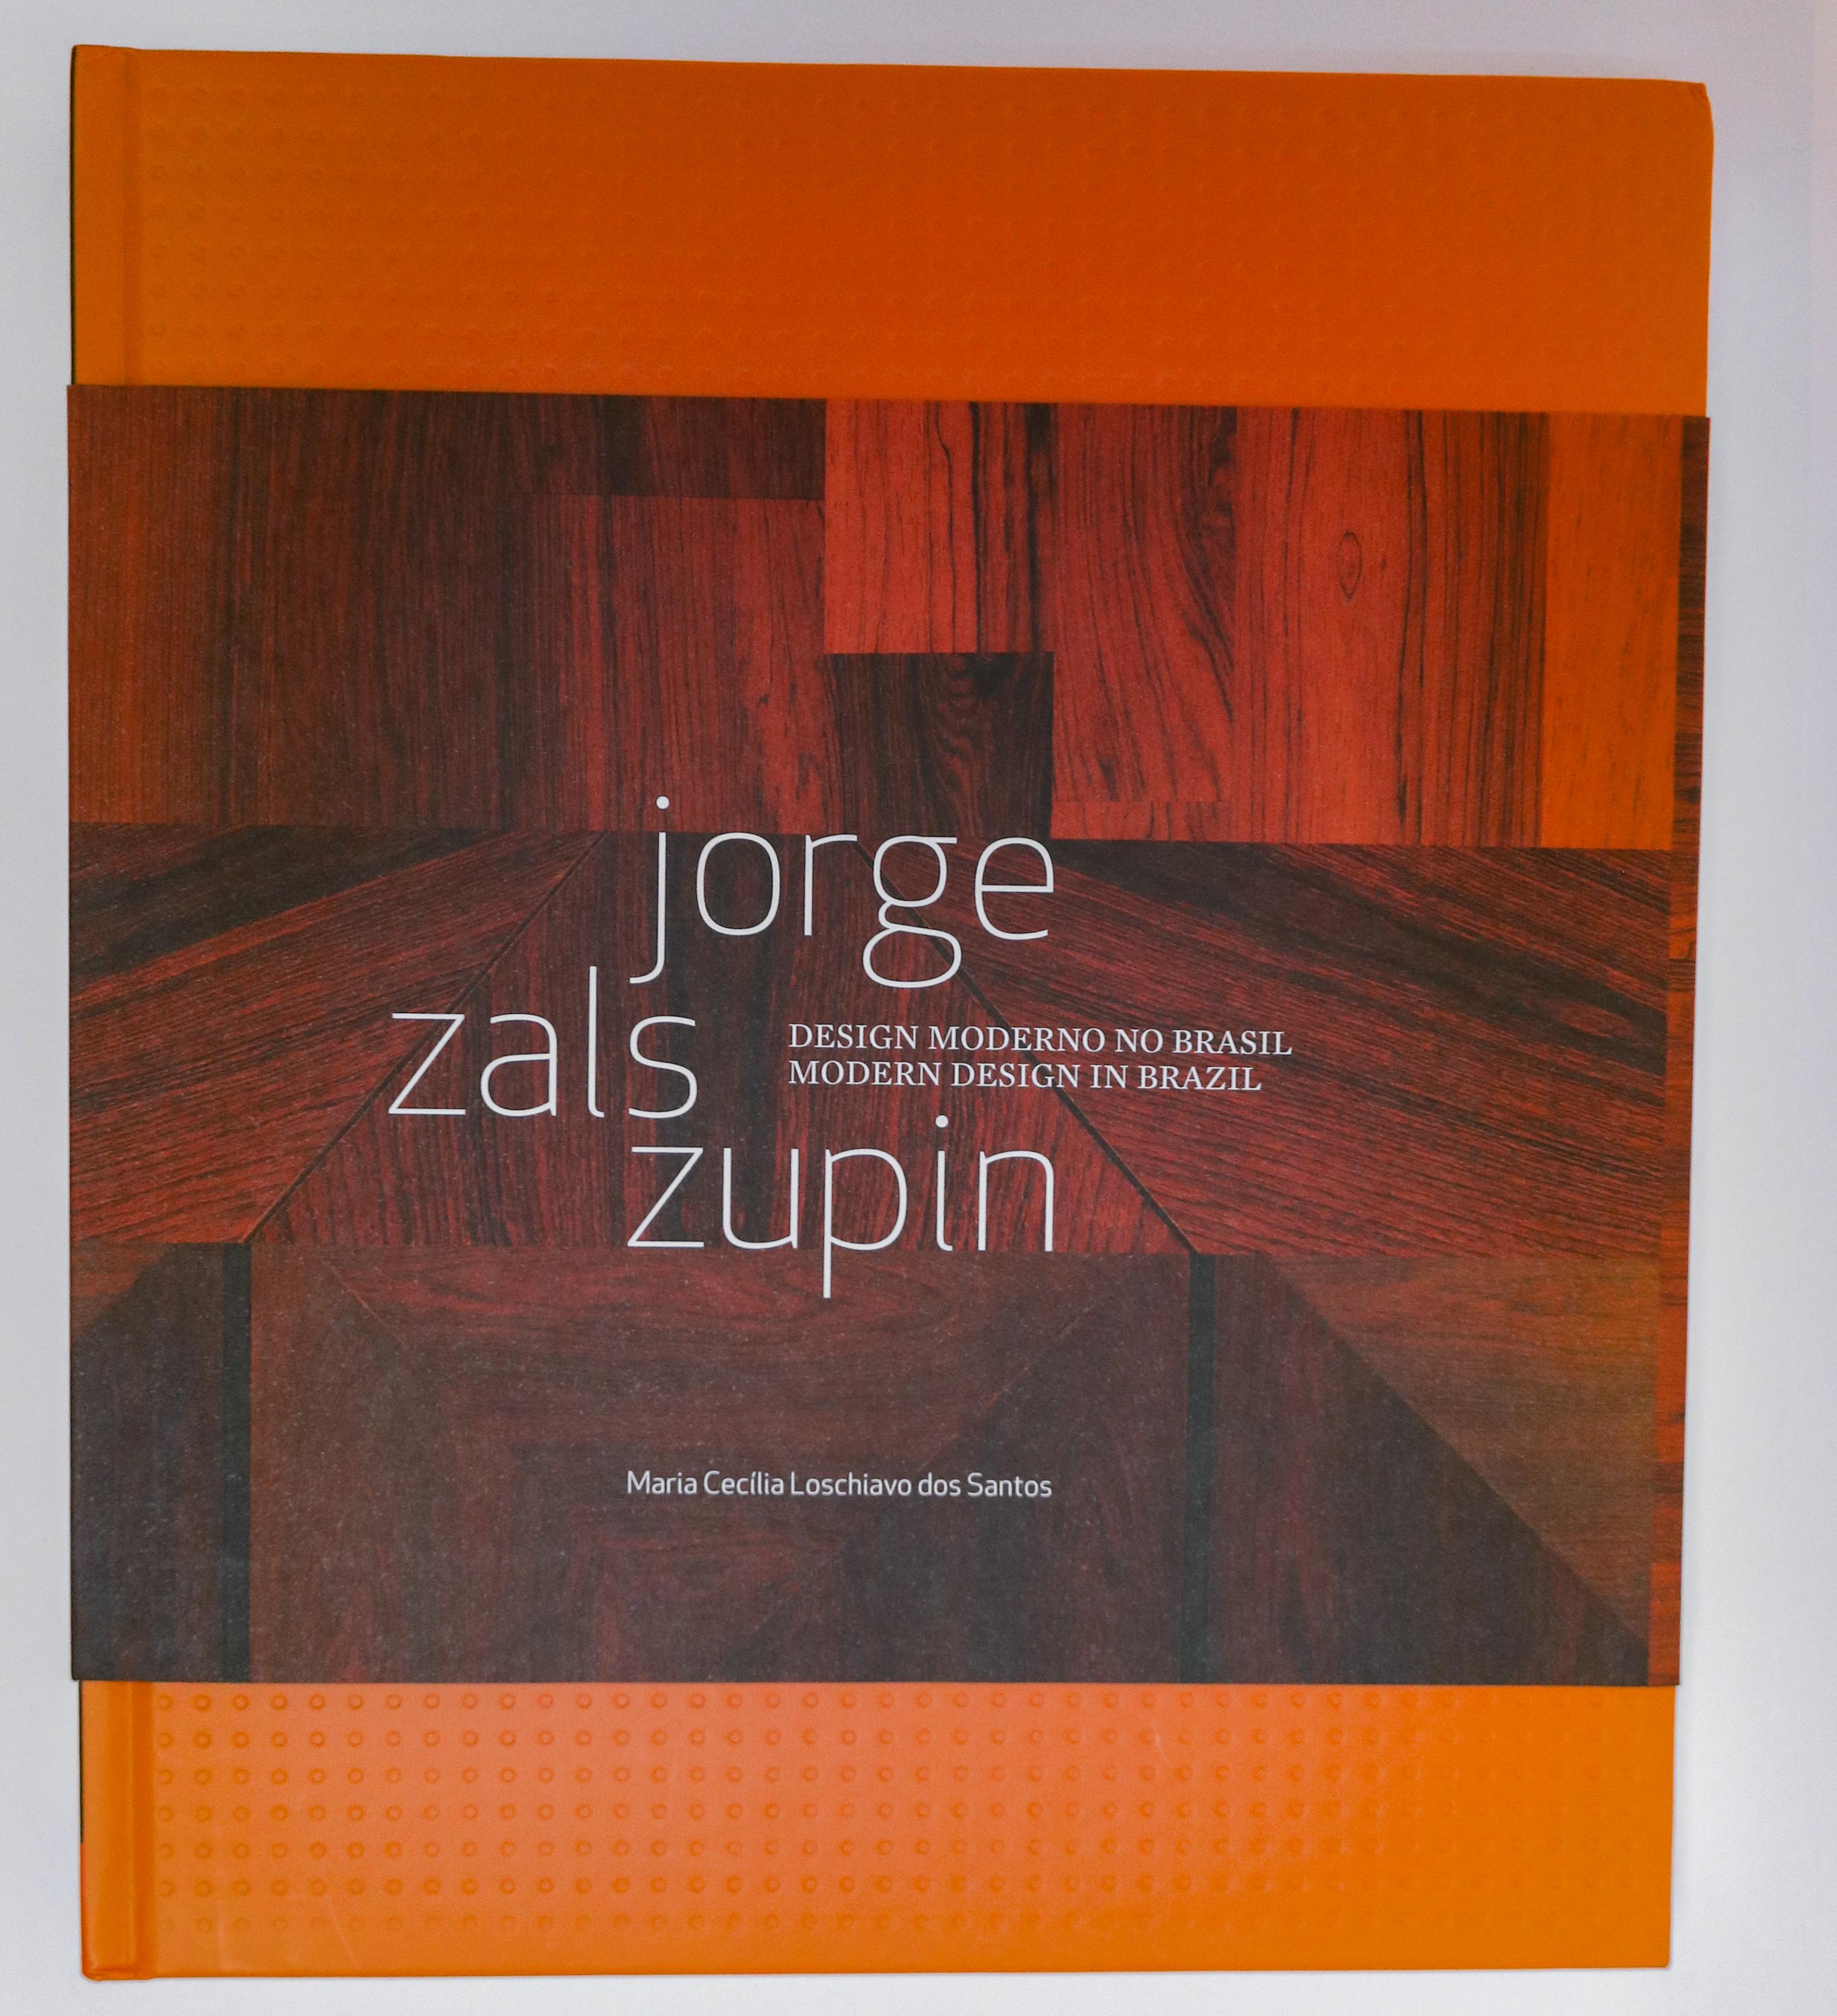 Jorge Zalszupin Modern Design in Brazil book by Maria Cecilia Loschiavo dos Santos published in Brazil in 2014 in Portuguese and English. Never published in the US. Covers all of Zalszupin's furniture designs. New, never used, still in plastic.